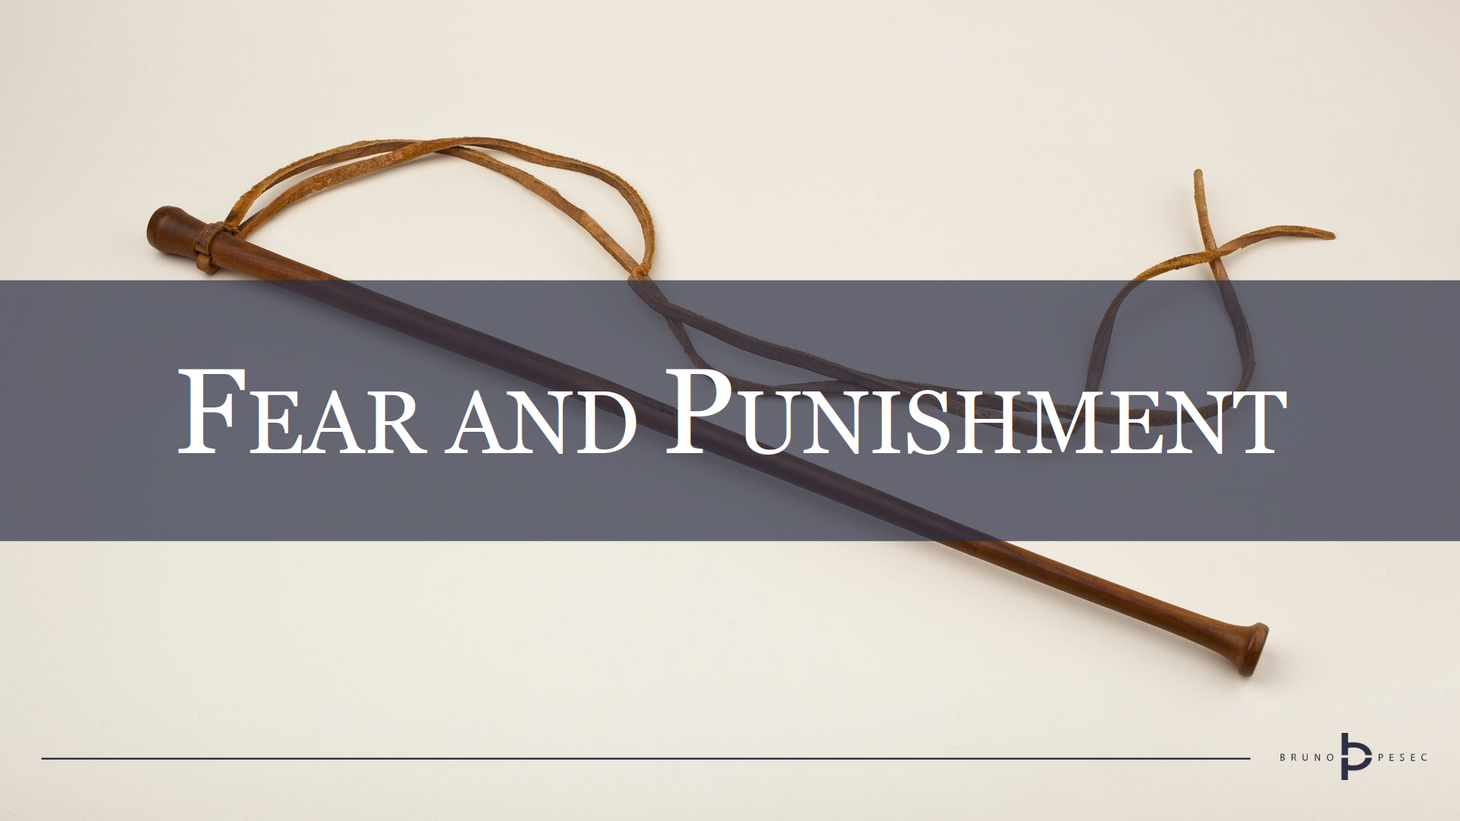 Fear and punishment